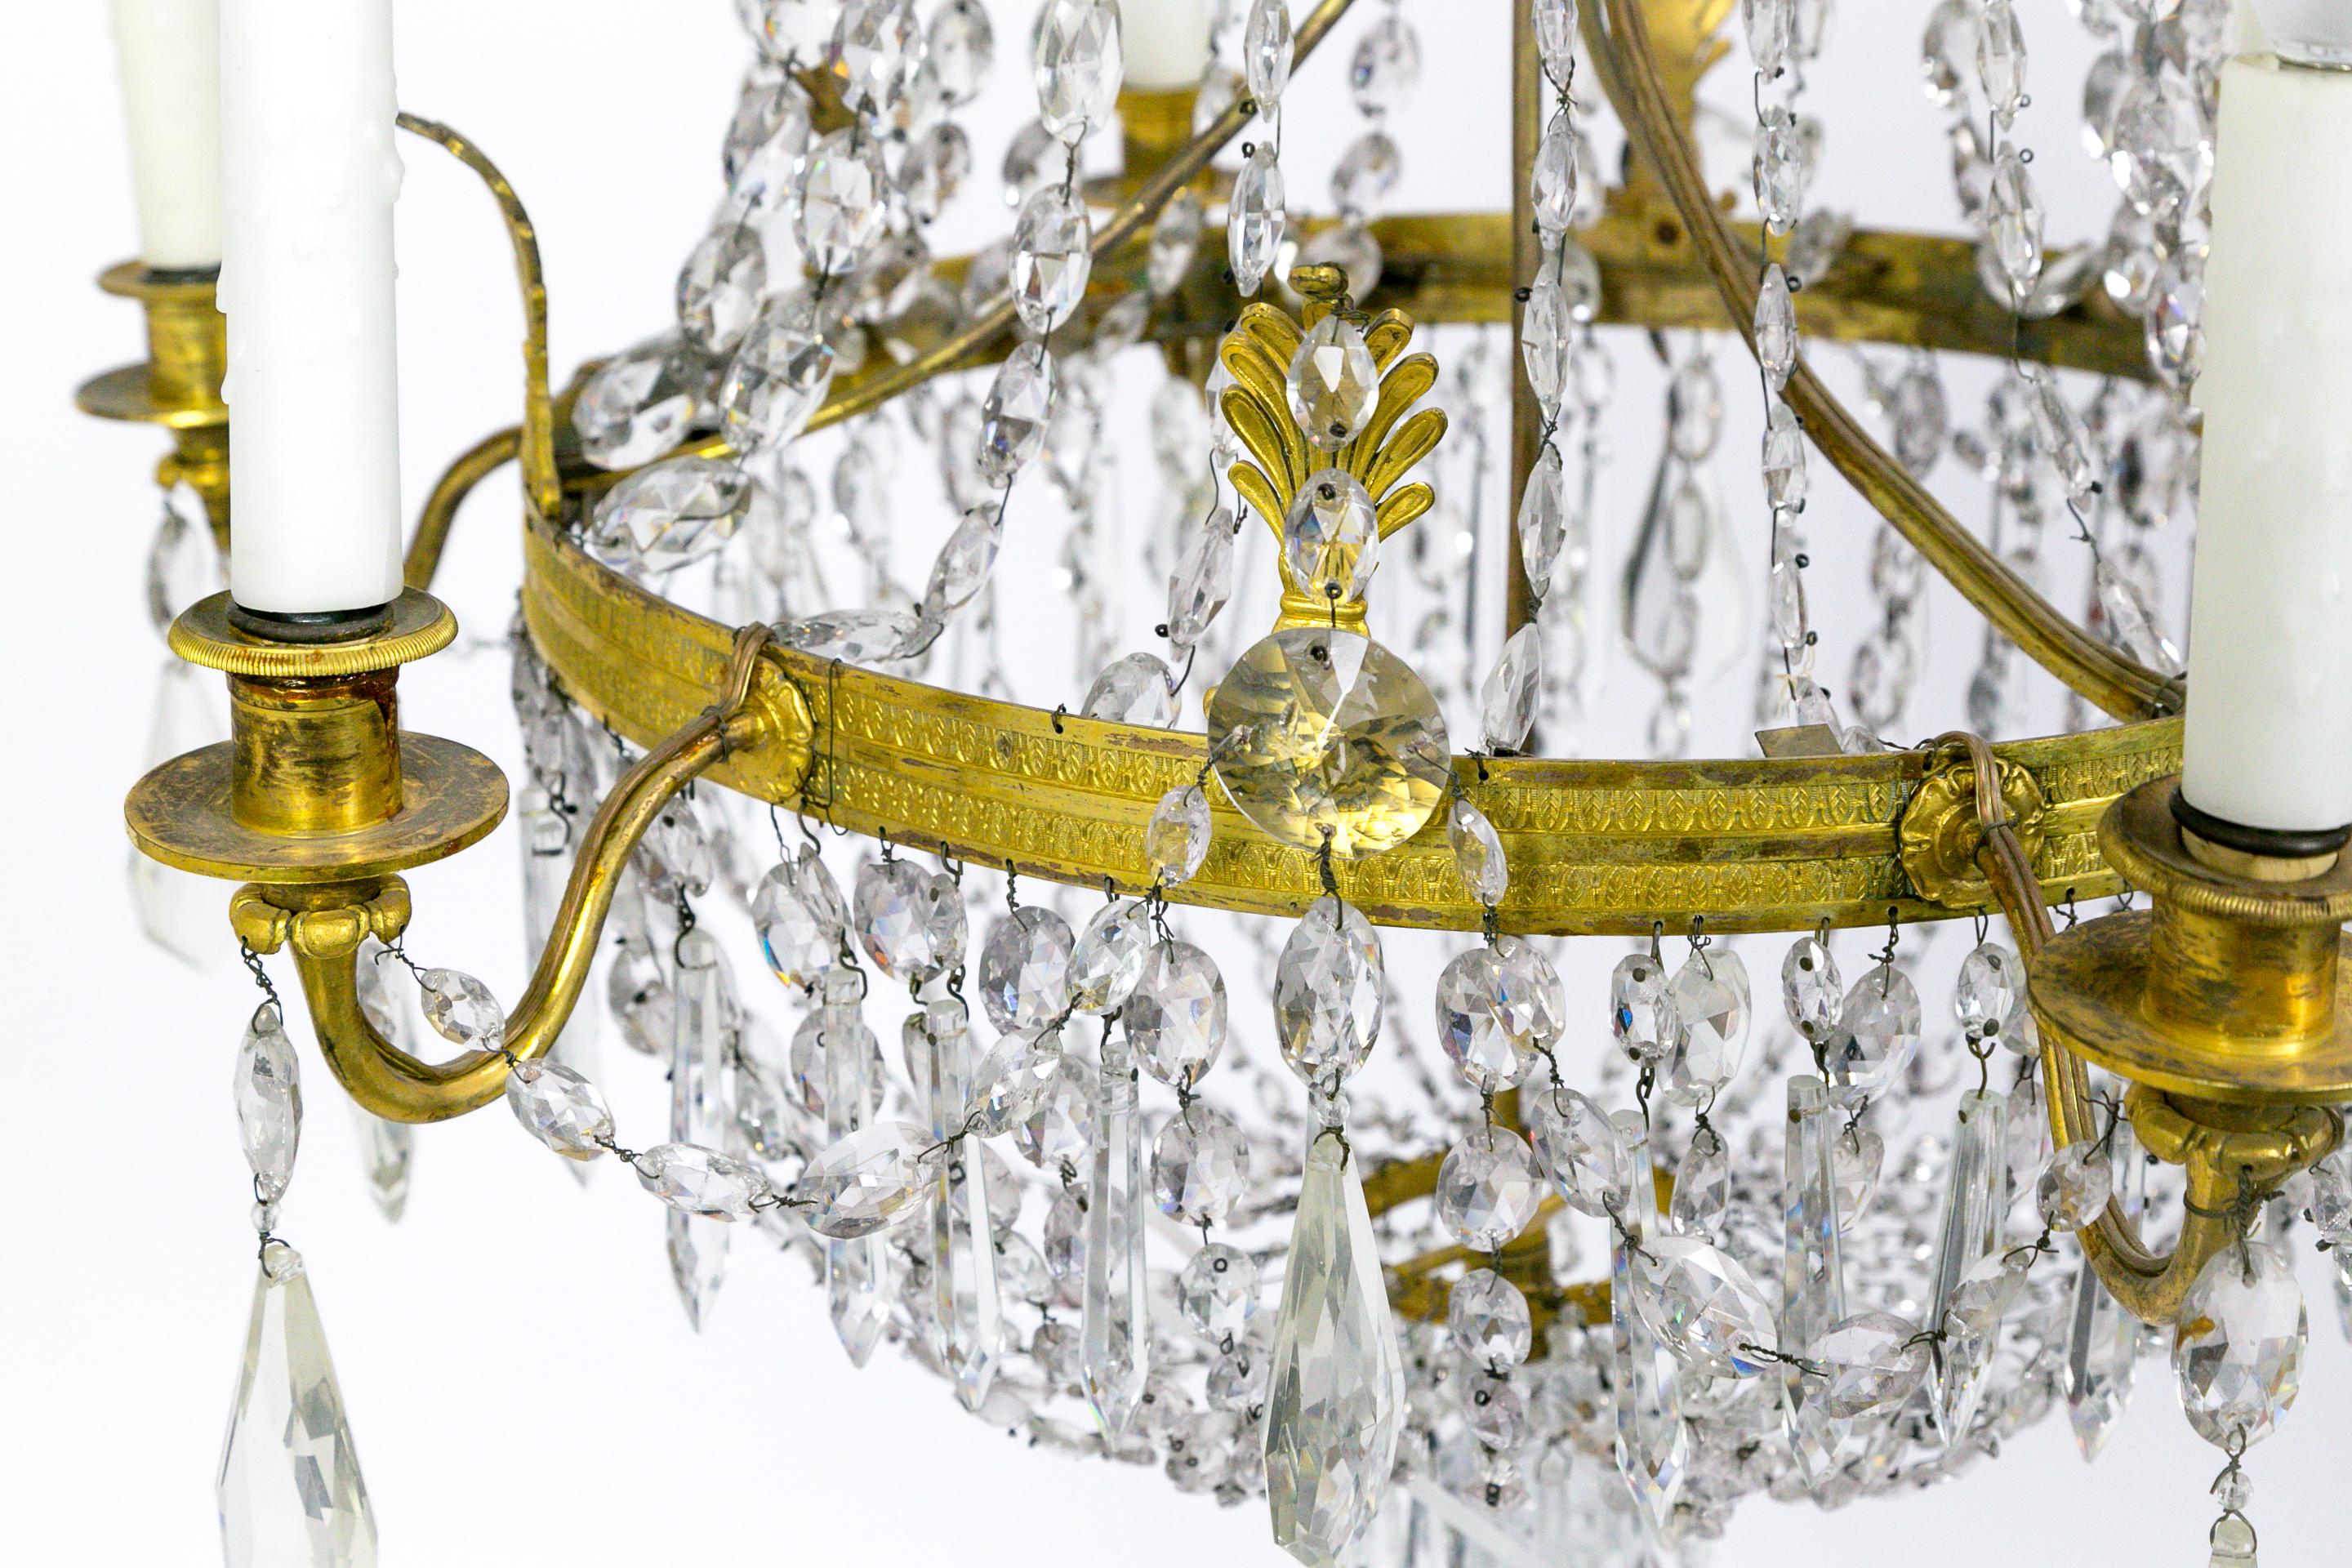 This Regency, tent and bag style, crystal chandelier has lovely brass fleurets, and crystal ropes, swags, and pendants; forming an elegant, elongated appearance. American, circa 1920s. Measures: 25